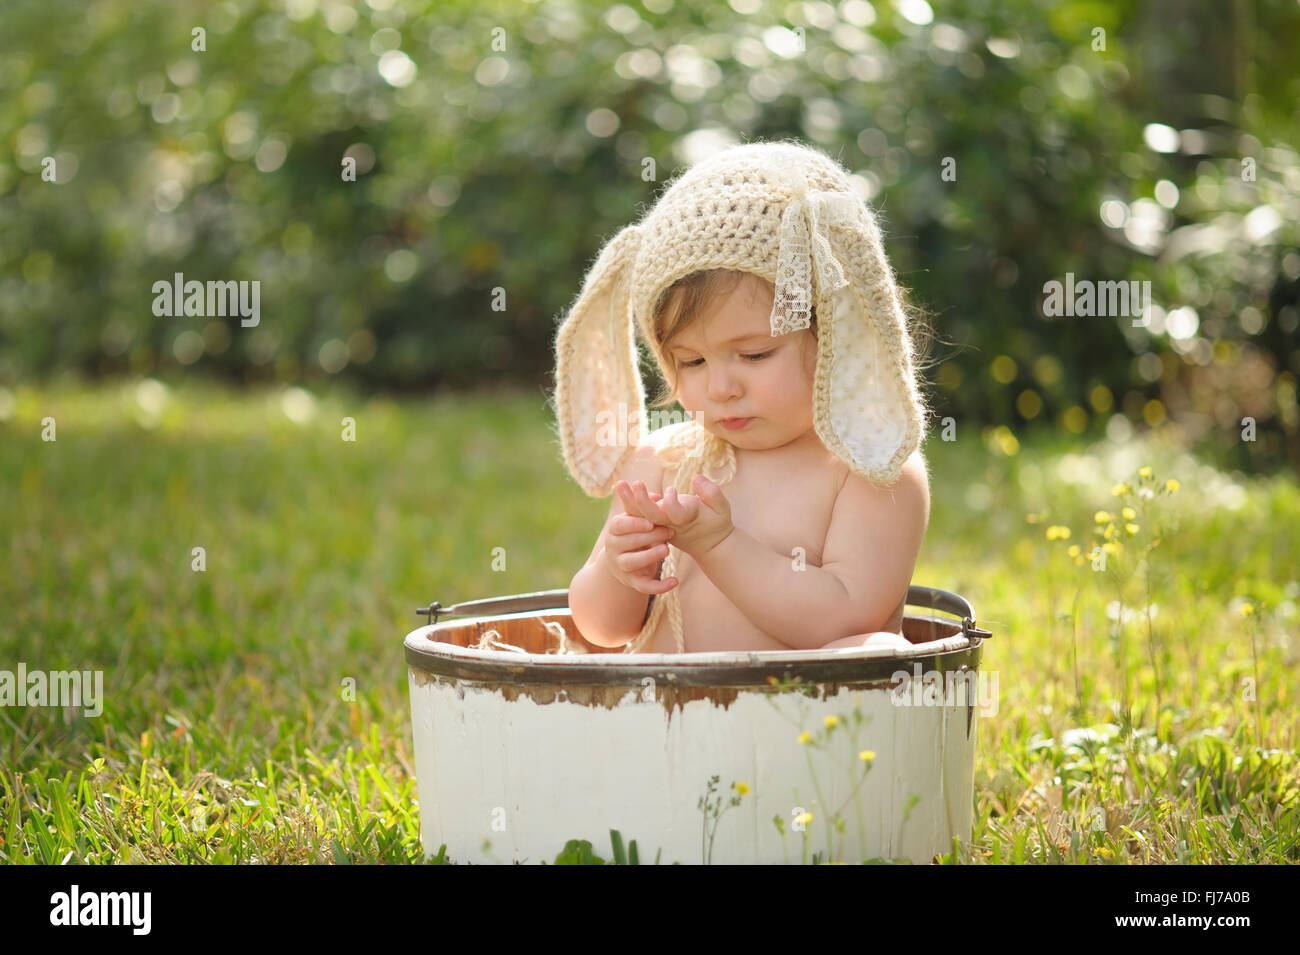 A baby girl wearing a crocheted, bunny bonnet. Stock Photo